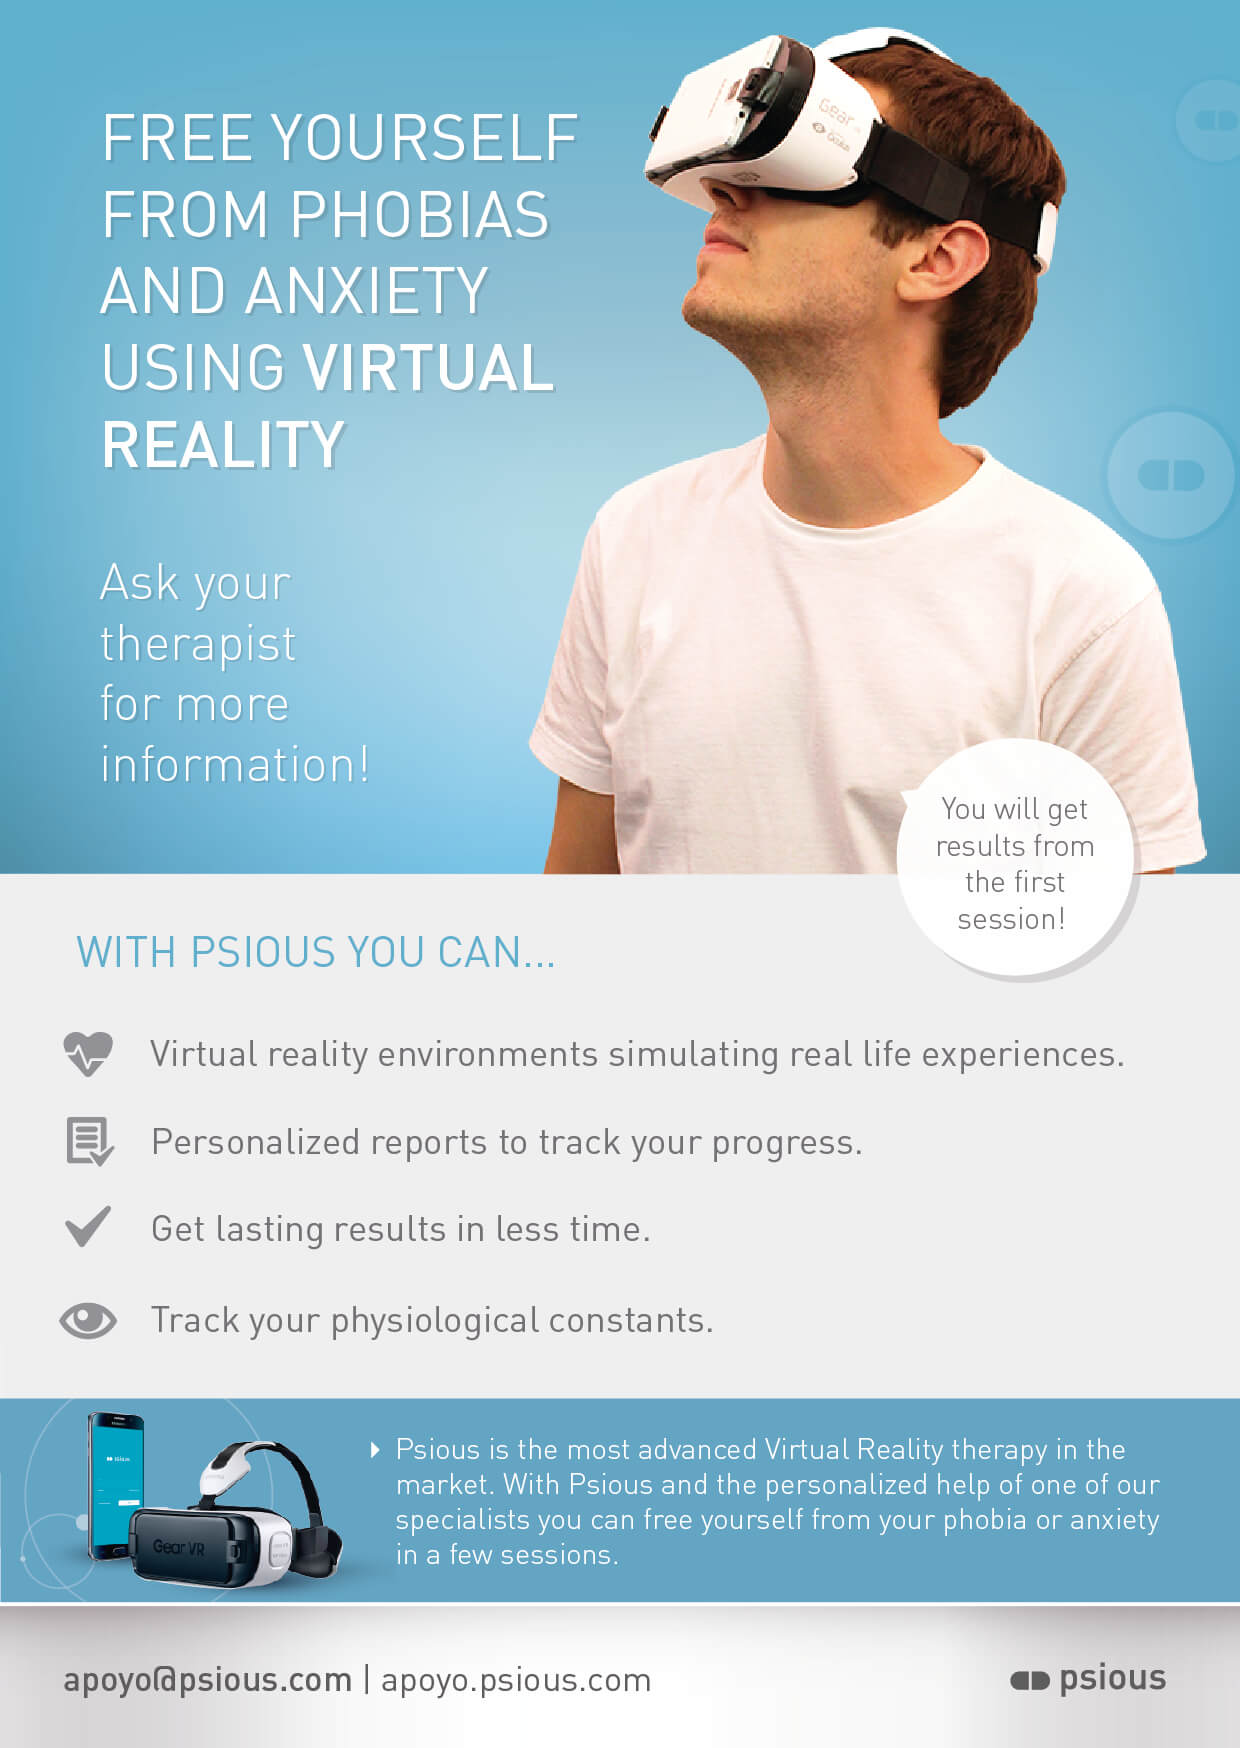 Free Yourself from Phobias and Anxiety using Virtual Reality